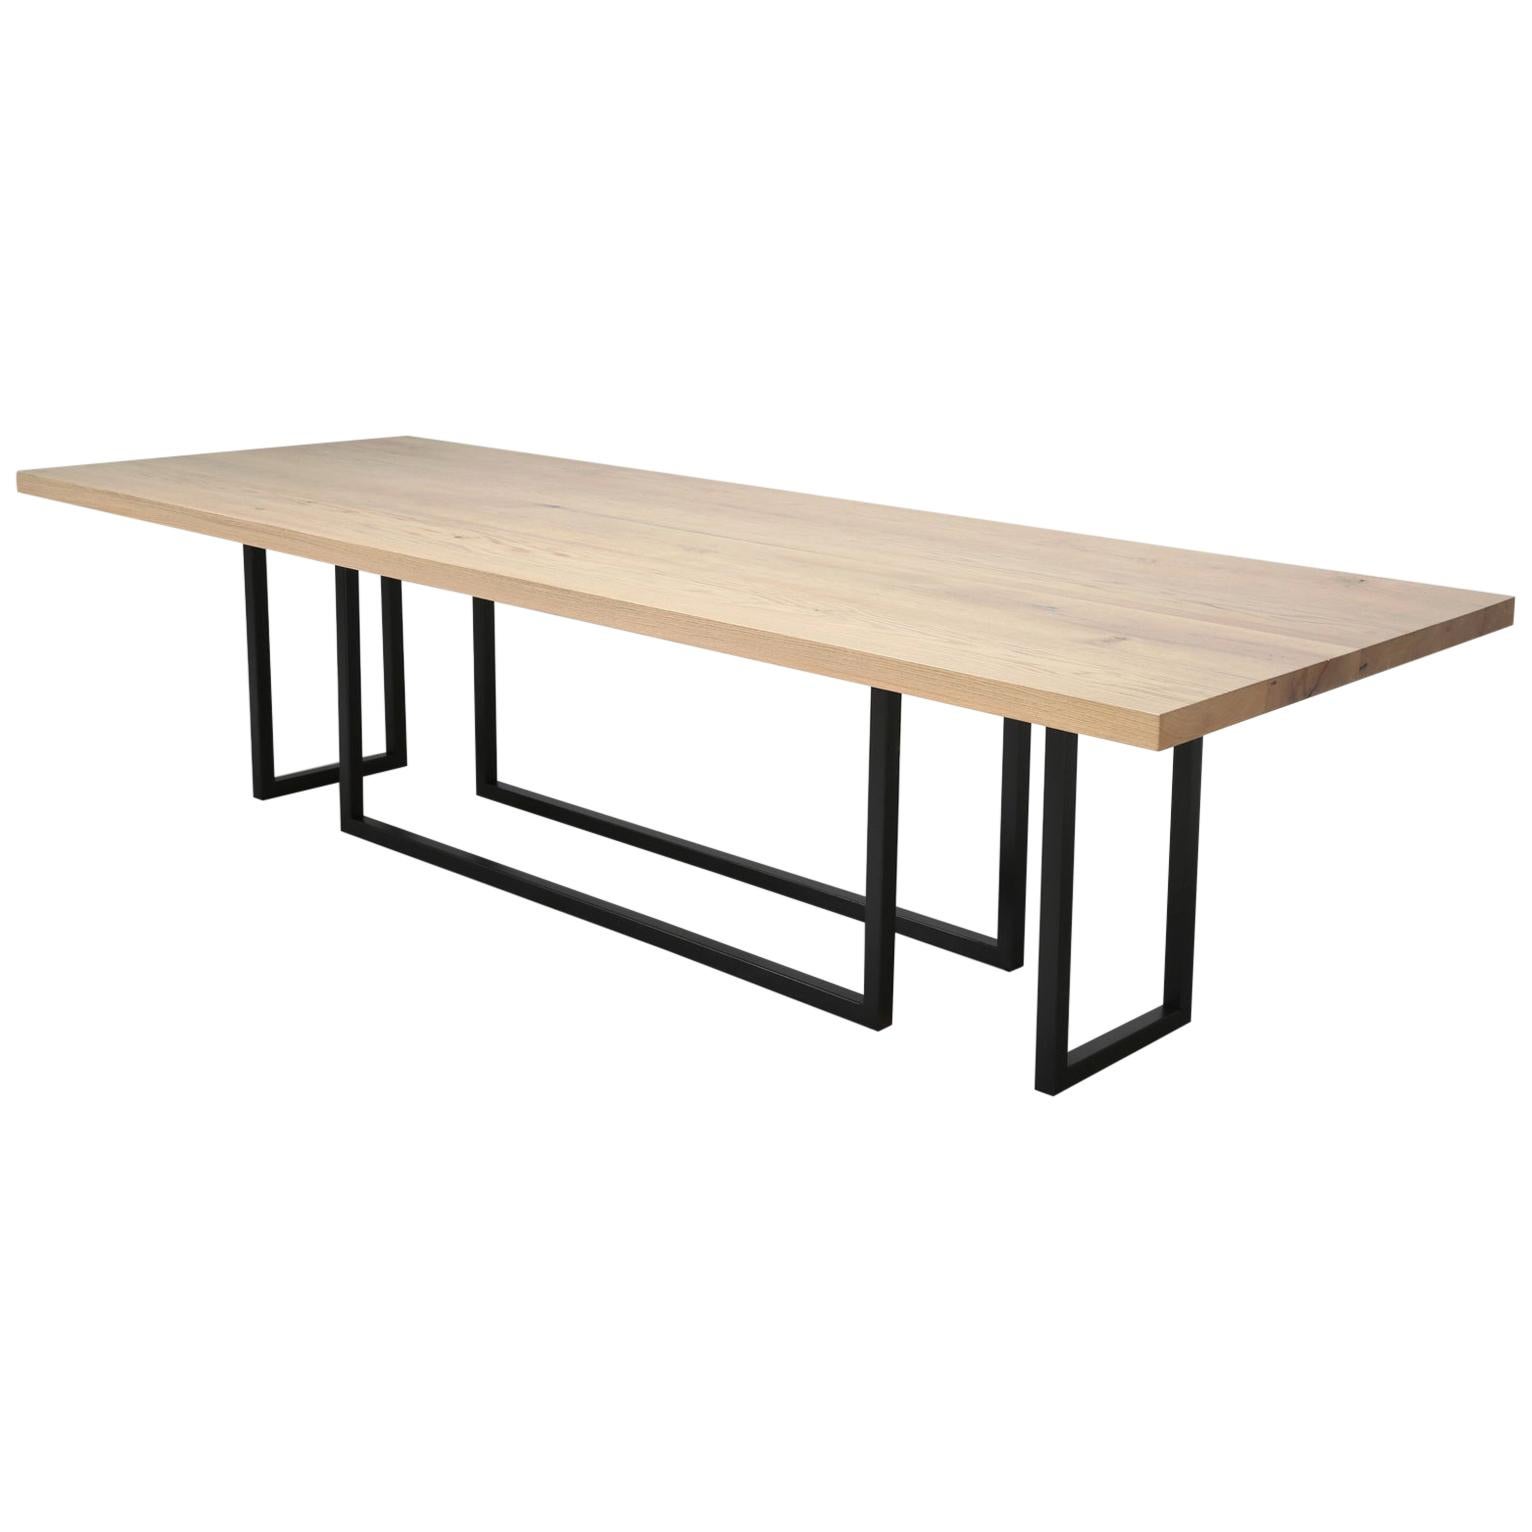 Mid-Century Modern Inspired Steel and Reclaimed White Oak Dining Table For Sale